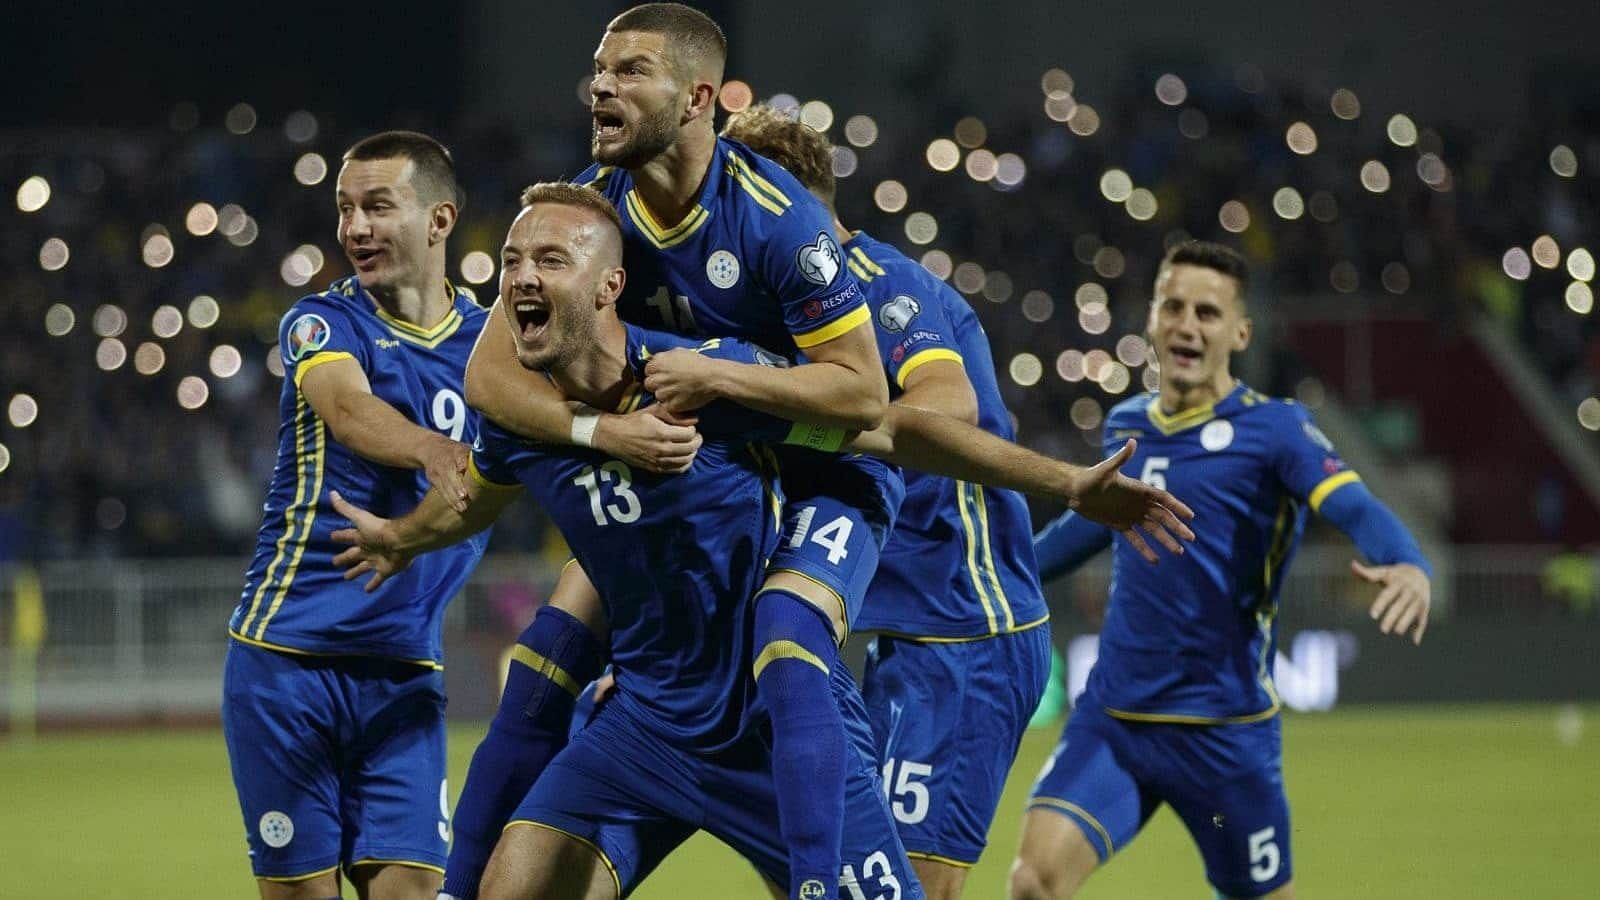 Kosovo face Cyprus in their 2022-23 UEFA Nations League campaign opener on Thursday